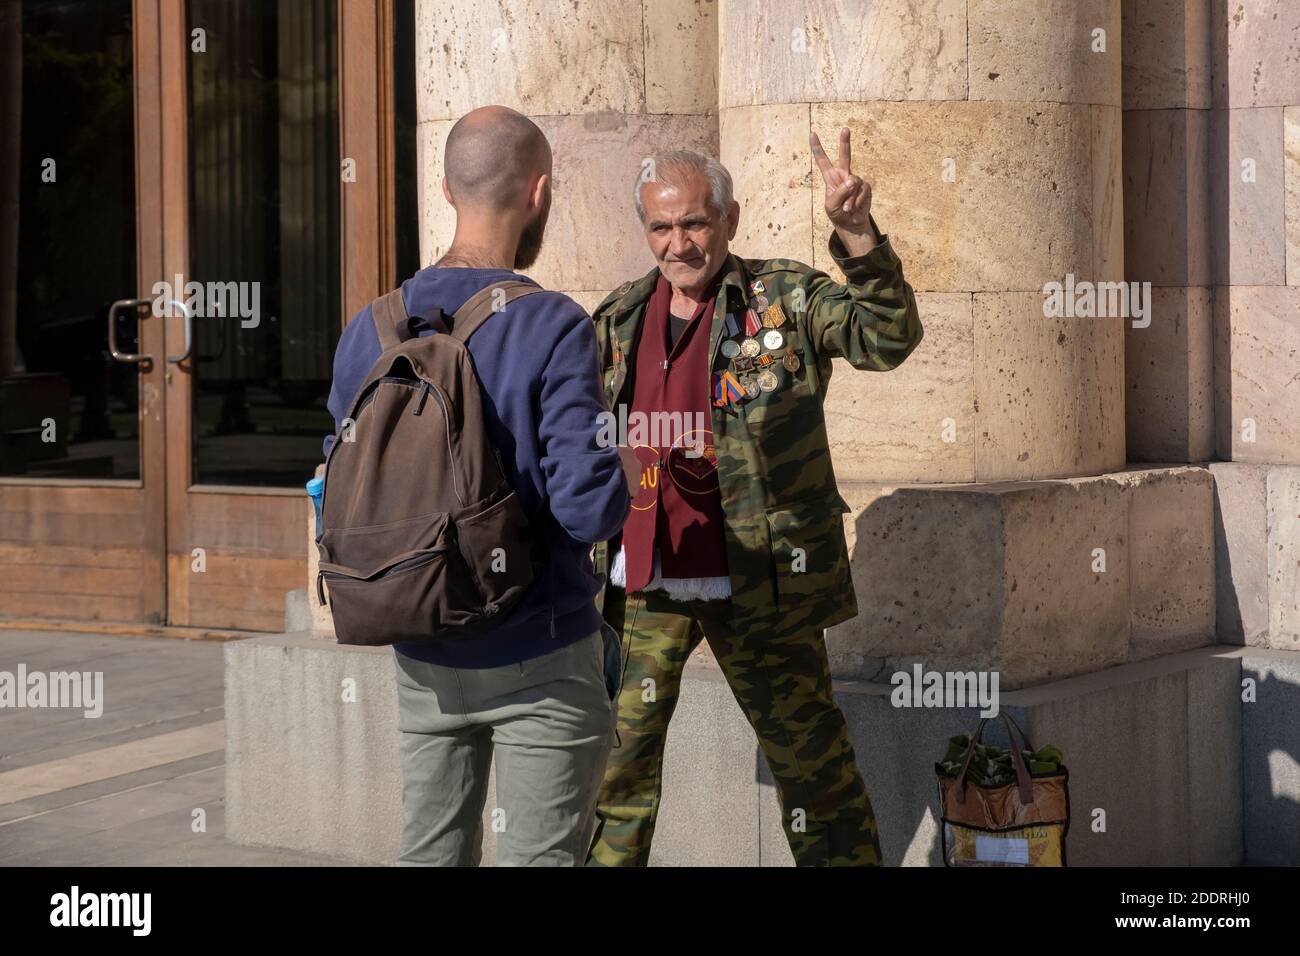 A reporter of Radio France Internationale, usually referred to as RFI  speaks to an elderly Armenian man which wears honor medals and marks the  victory sign during a military conflict between Armenian